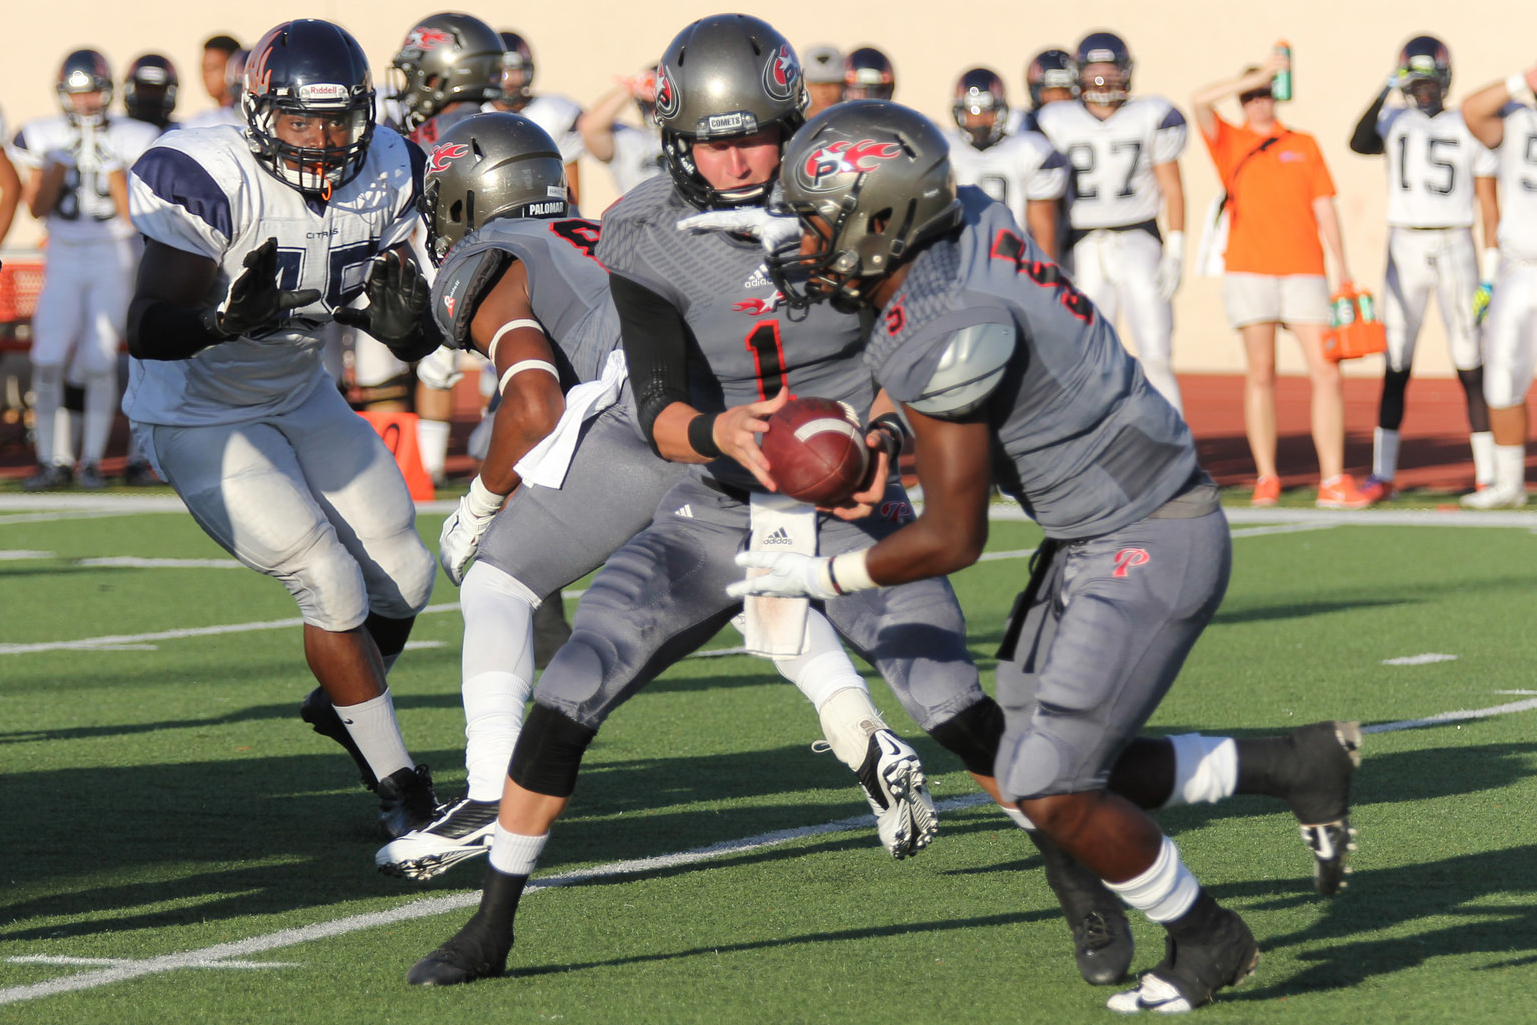 A Palomar football player hands a team player a football as another team player tries to block an opposing player on the left.